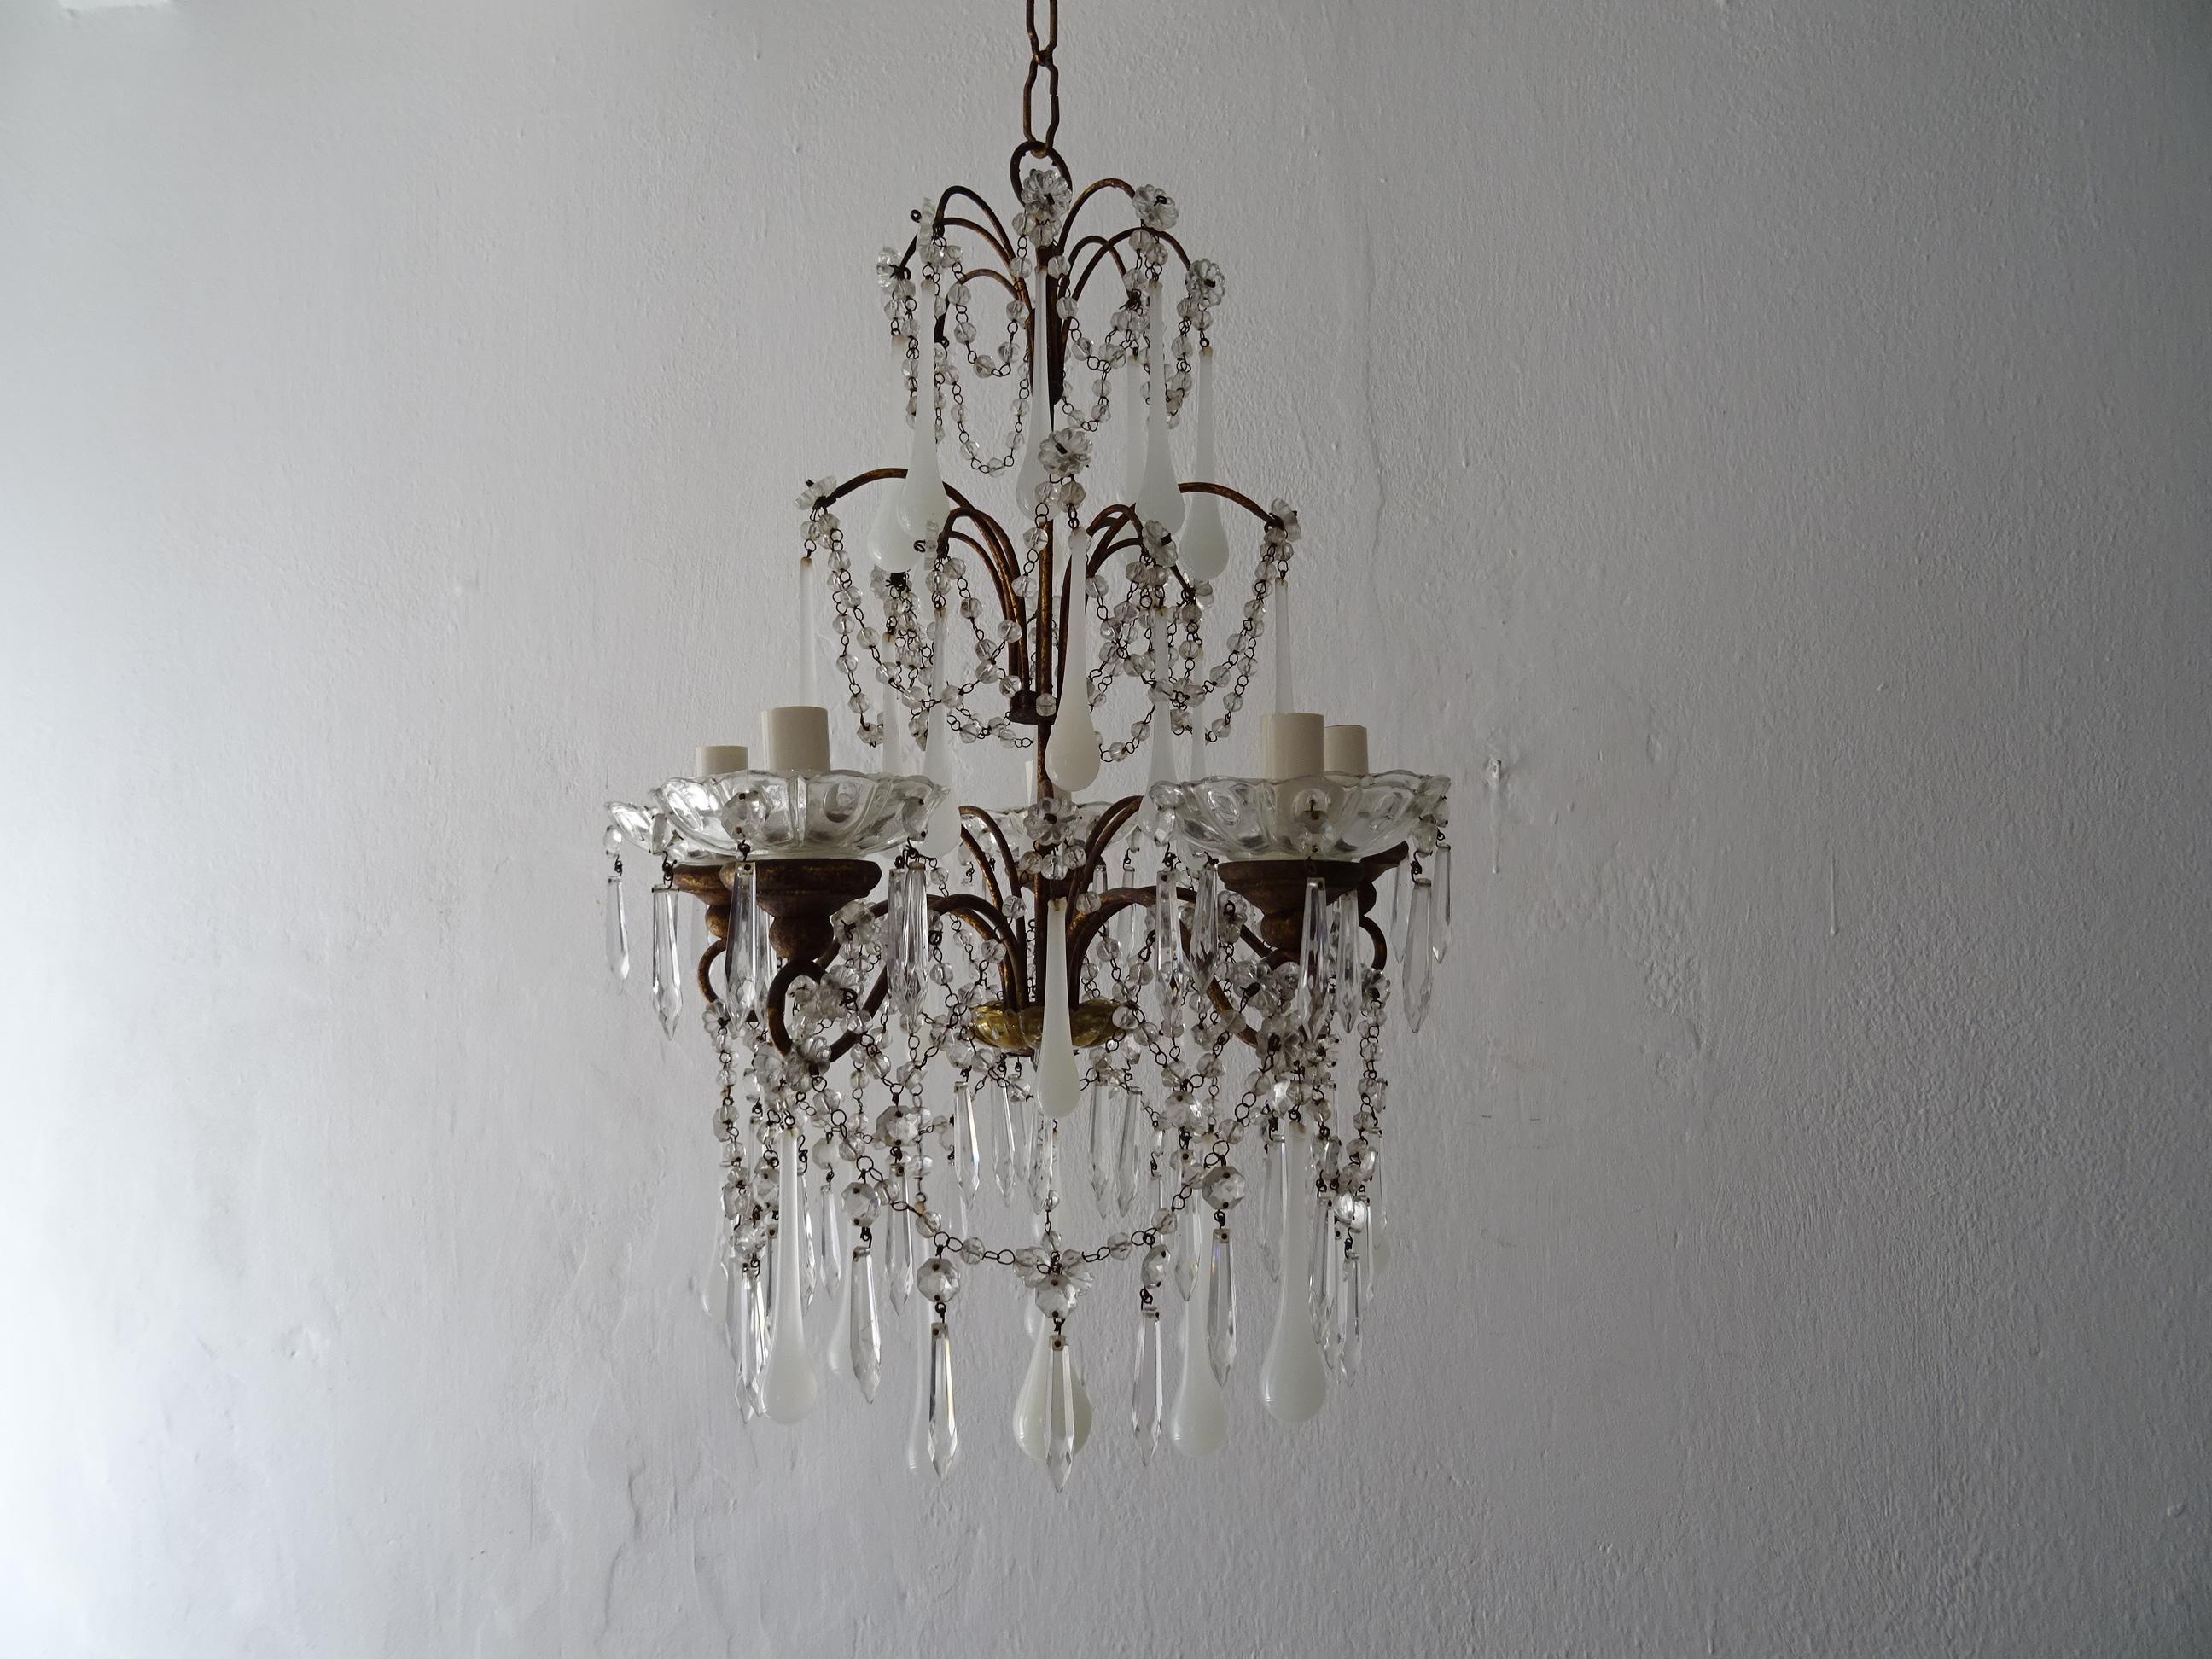 1930 French White Opaline Murano Drops Crystal Swags Darling Chandelier c. 1920 For Sale 7